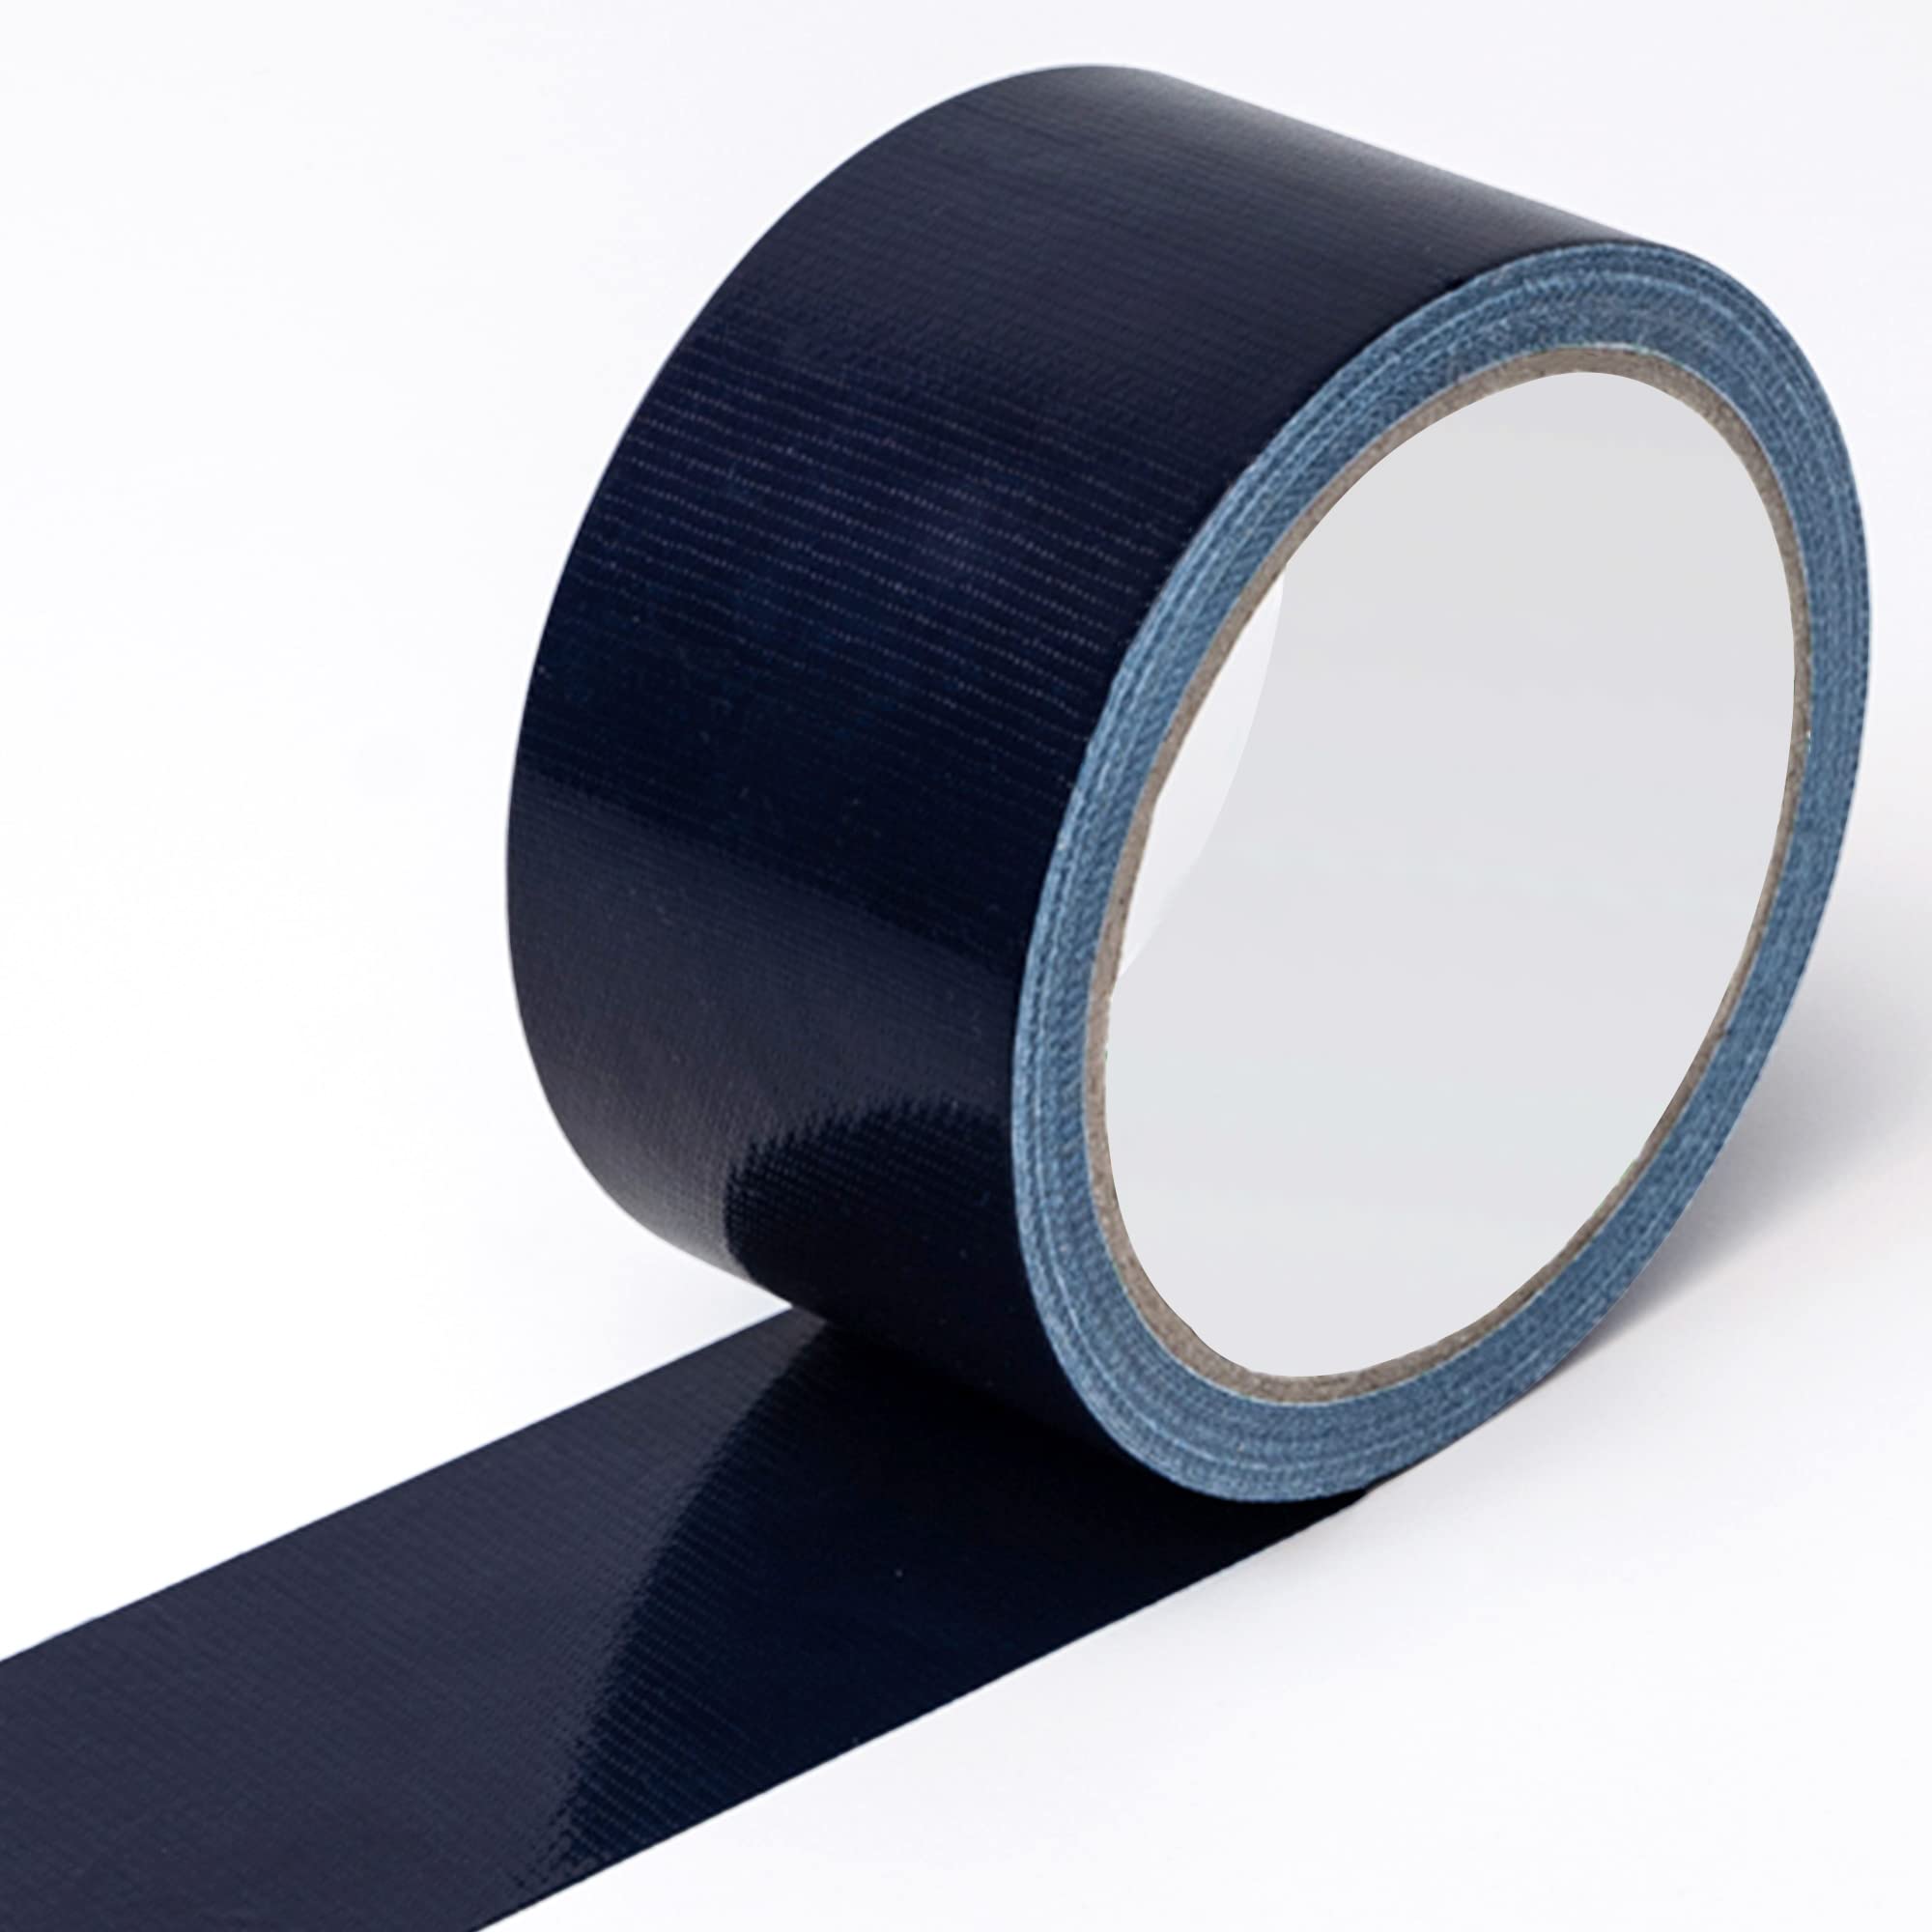 Reniteco Navy Blue Duct Tape- 2 inches x 10 Yards Heavy Duty Duct